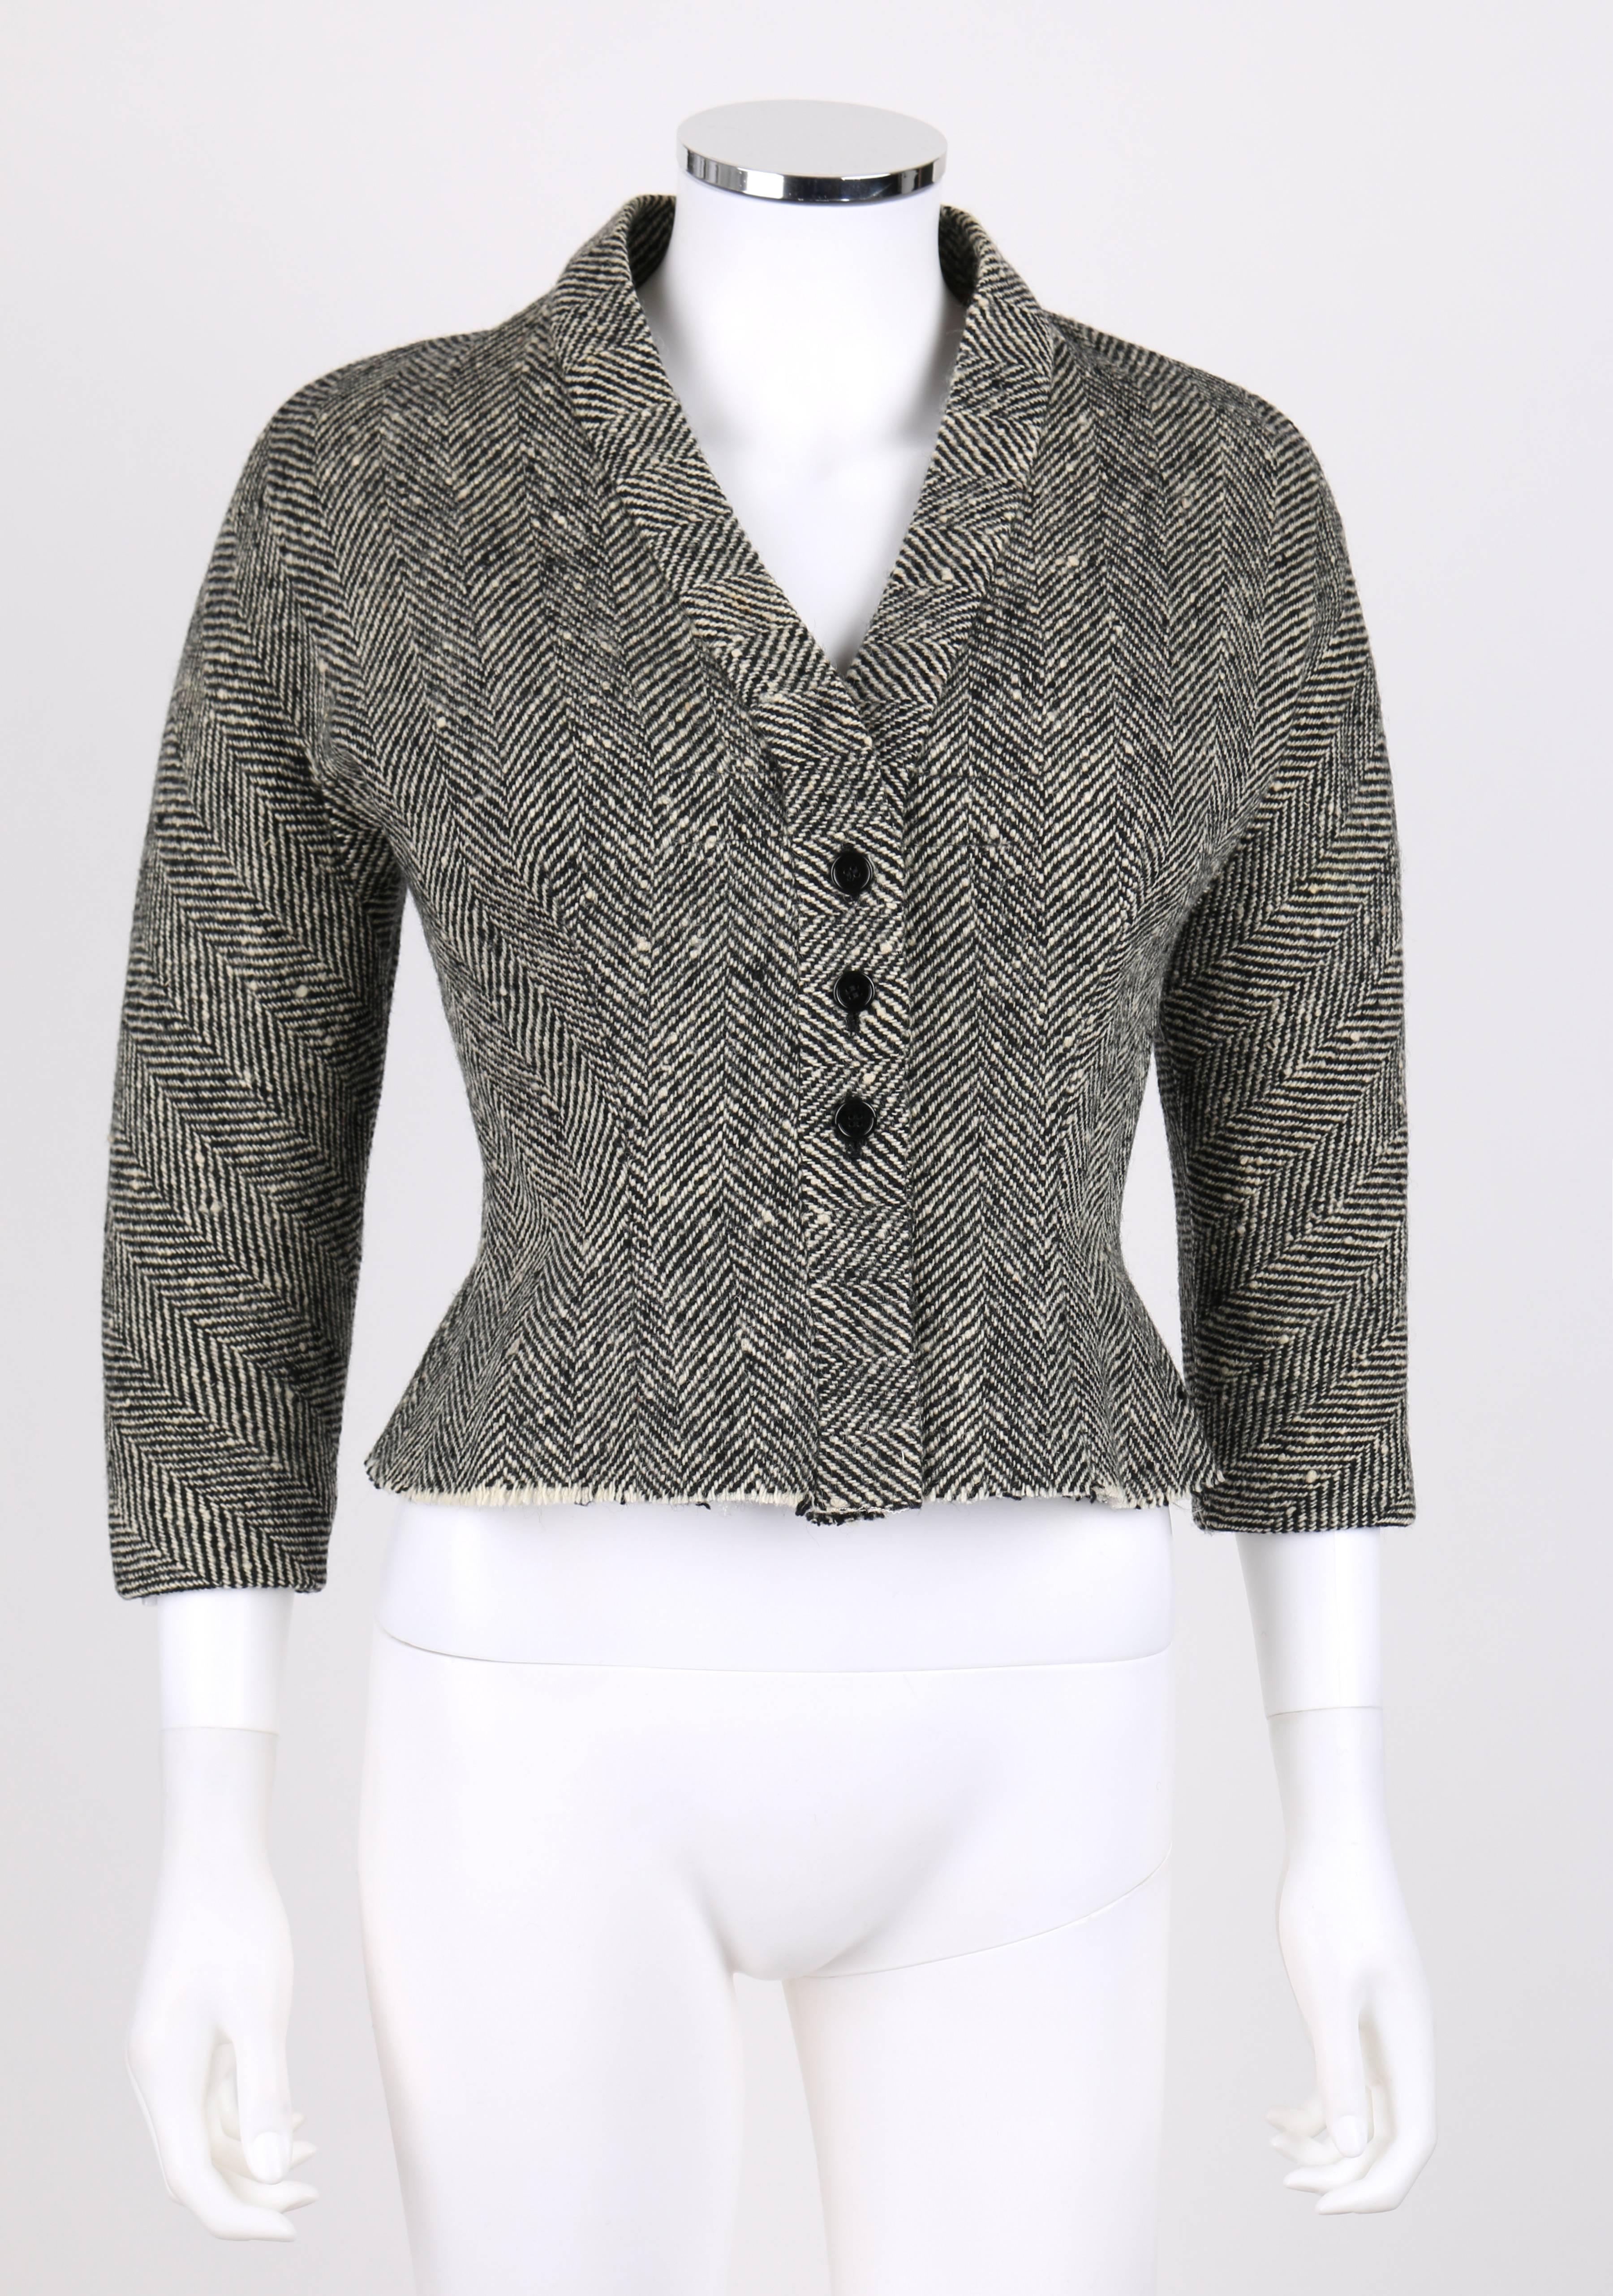 Vintage Hubert de Givenchy c.1952, very early work, black and cream herringbone structured silhouette wool jacket. Hand written couture number 